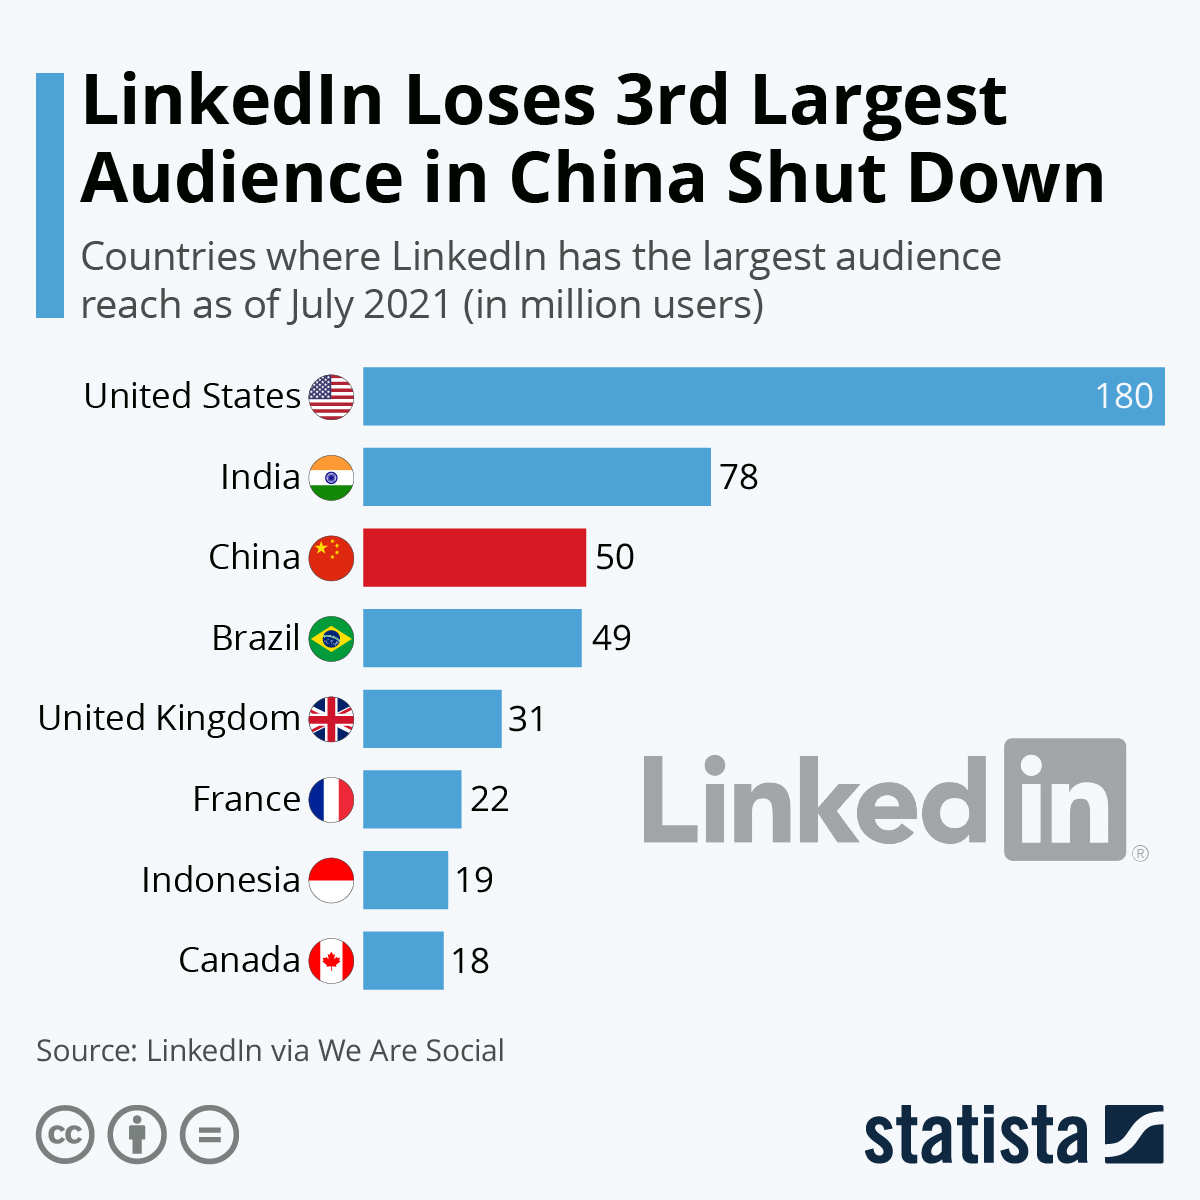 LinkedIn Loses 3rd Largest Audience in China Shut Down